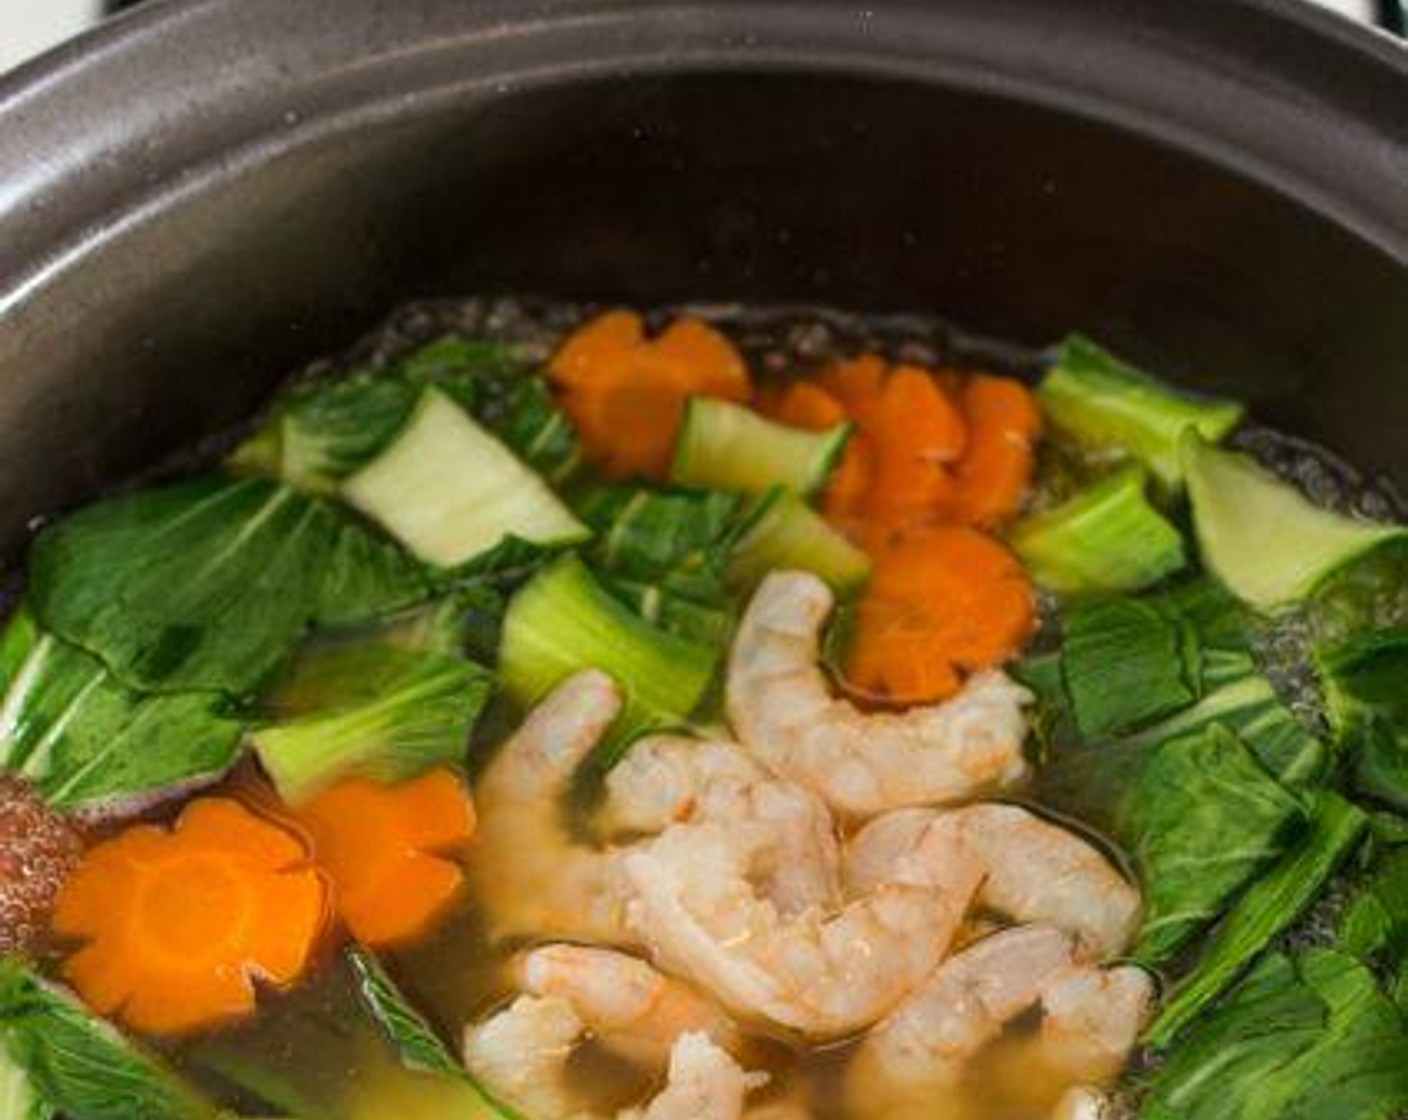 step 3 Bring Chicken Stock (4 cups) to a boil over medium-high heat. Add Carrot (1). Add Soy Sauce (1 tsp), Shaoxing Cooking Wine (1 tsp) (if using) and Salt (1/2 tsp) to the soup. Add Baby Bok Choy (2 stalks) to the soup. Bring the soup to a boil again, then add the Medium Shrimp (8). Let the soup boil for a few seconds, turn off the heat and cover the pot.